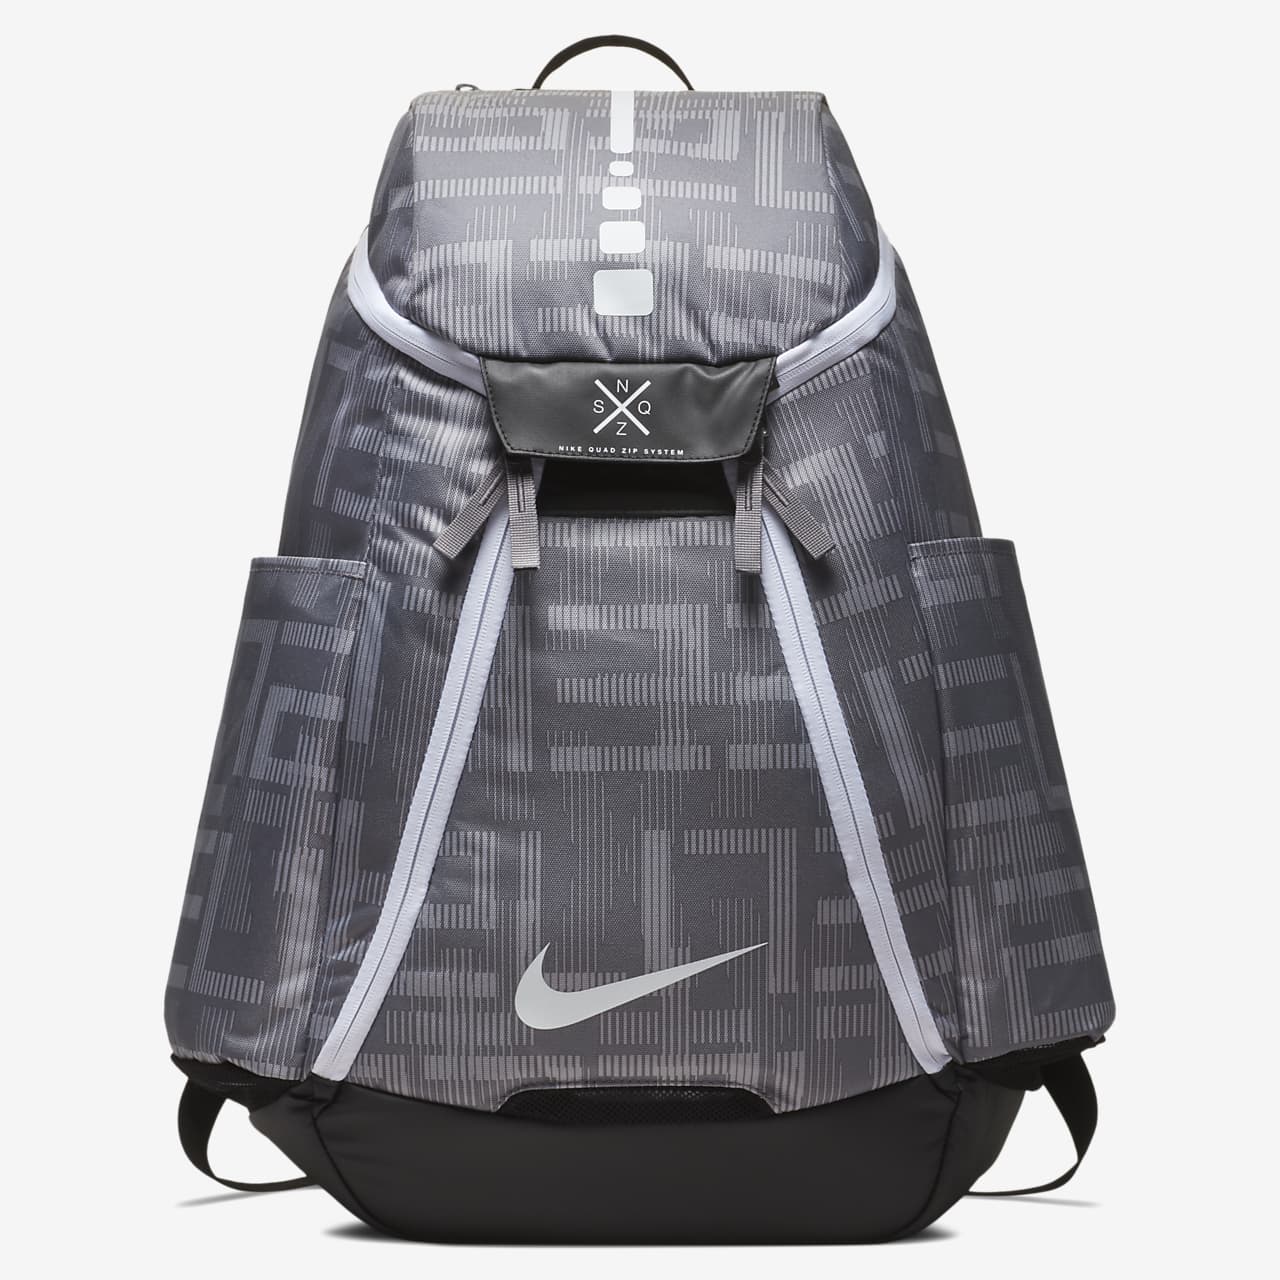 Nike hoops elite max air team backpack when you buy something in the shops you have rights under laws